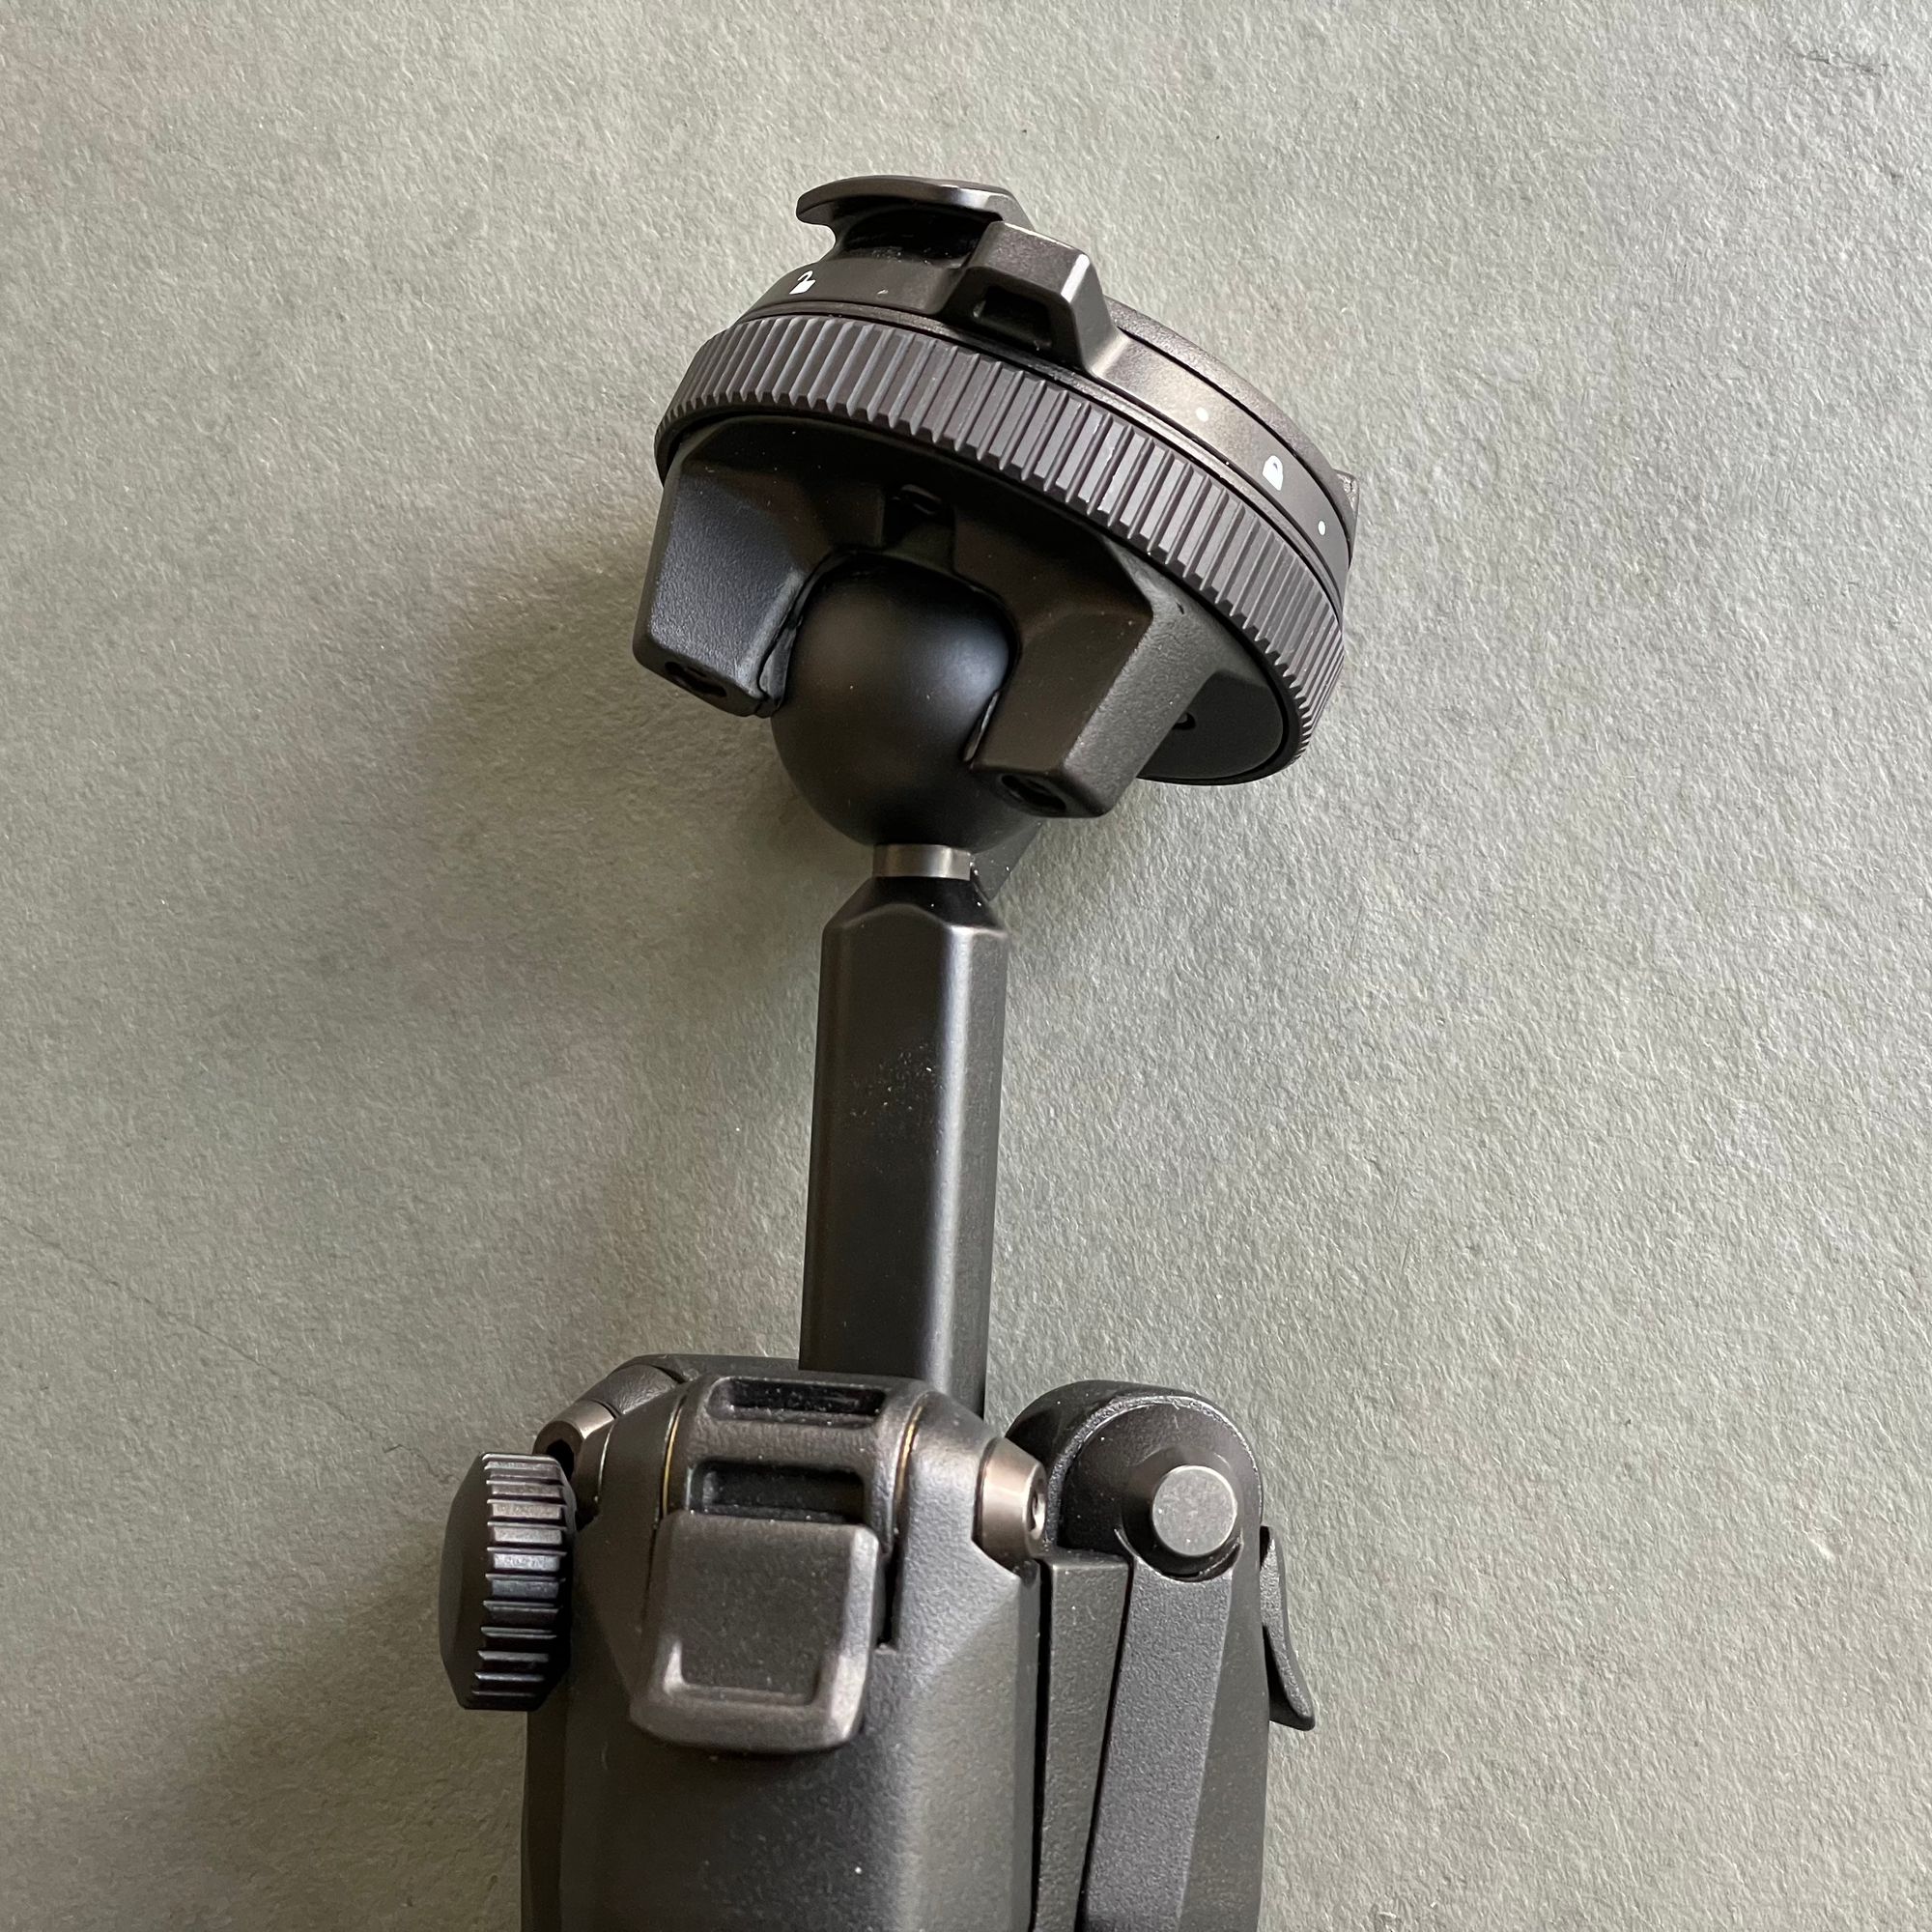 Tripod head extended and adjustable